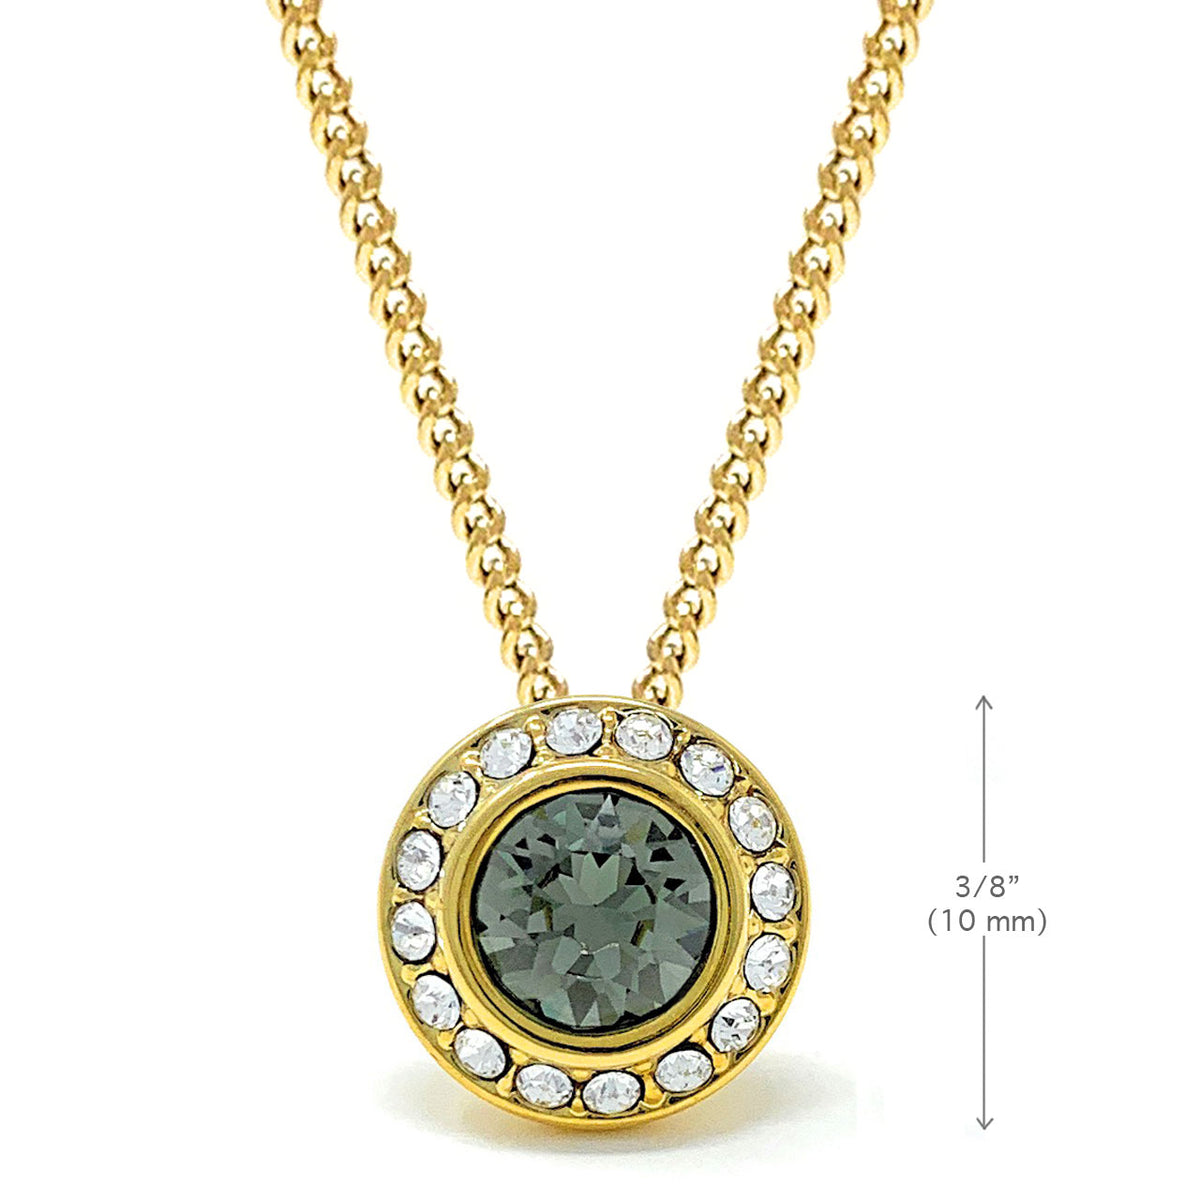 Halo Pave Pendant Necklace with Black Diamond Round Crystals from Swarovski Gold Plated - Ed Heart